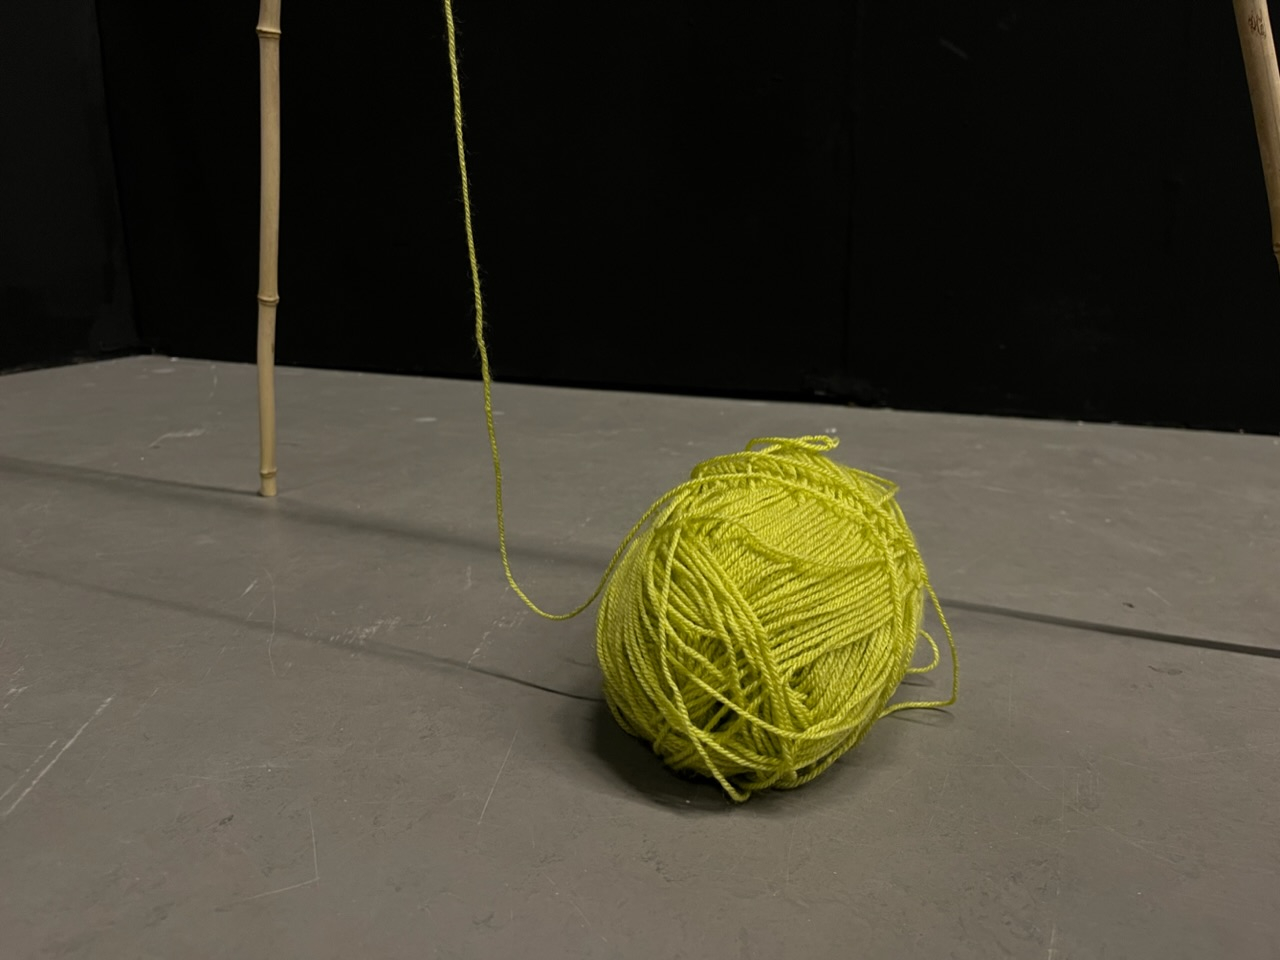 Ball of green acrylic yarn and upright bamboo stick on grey floor, leading up off the top of the image